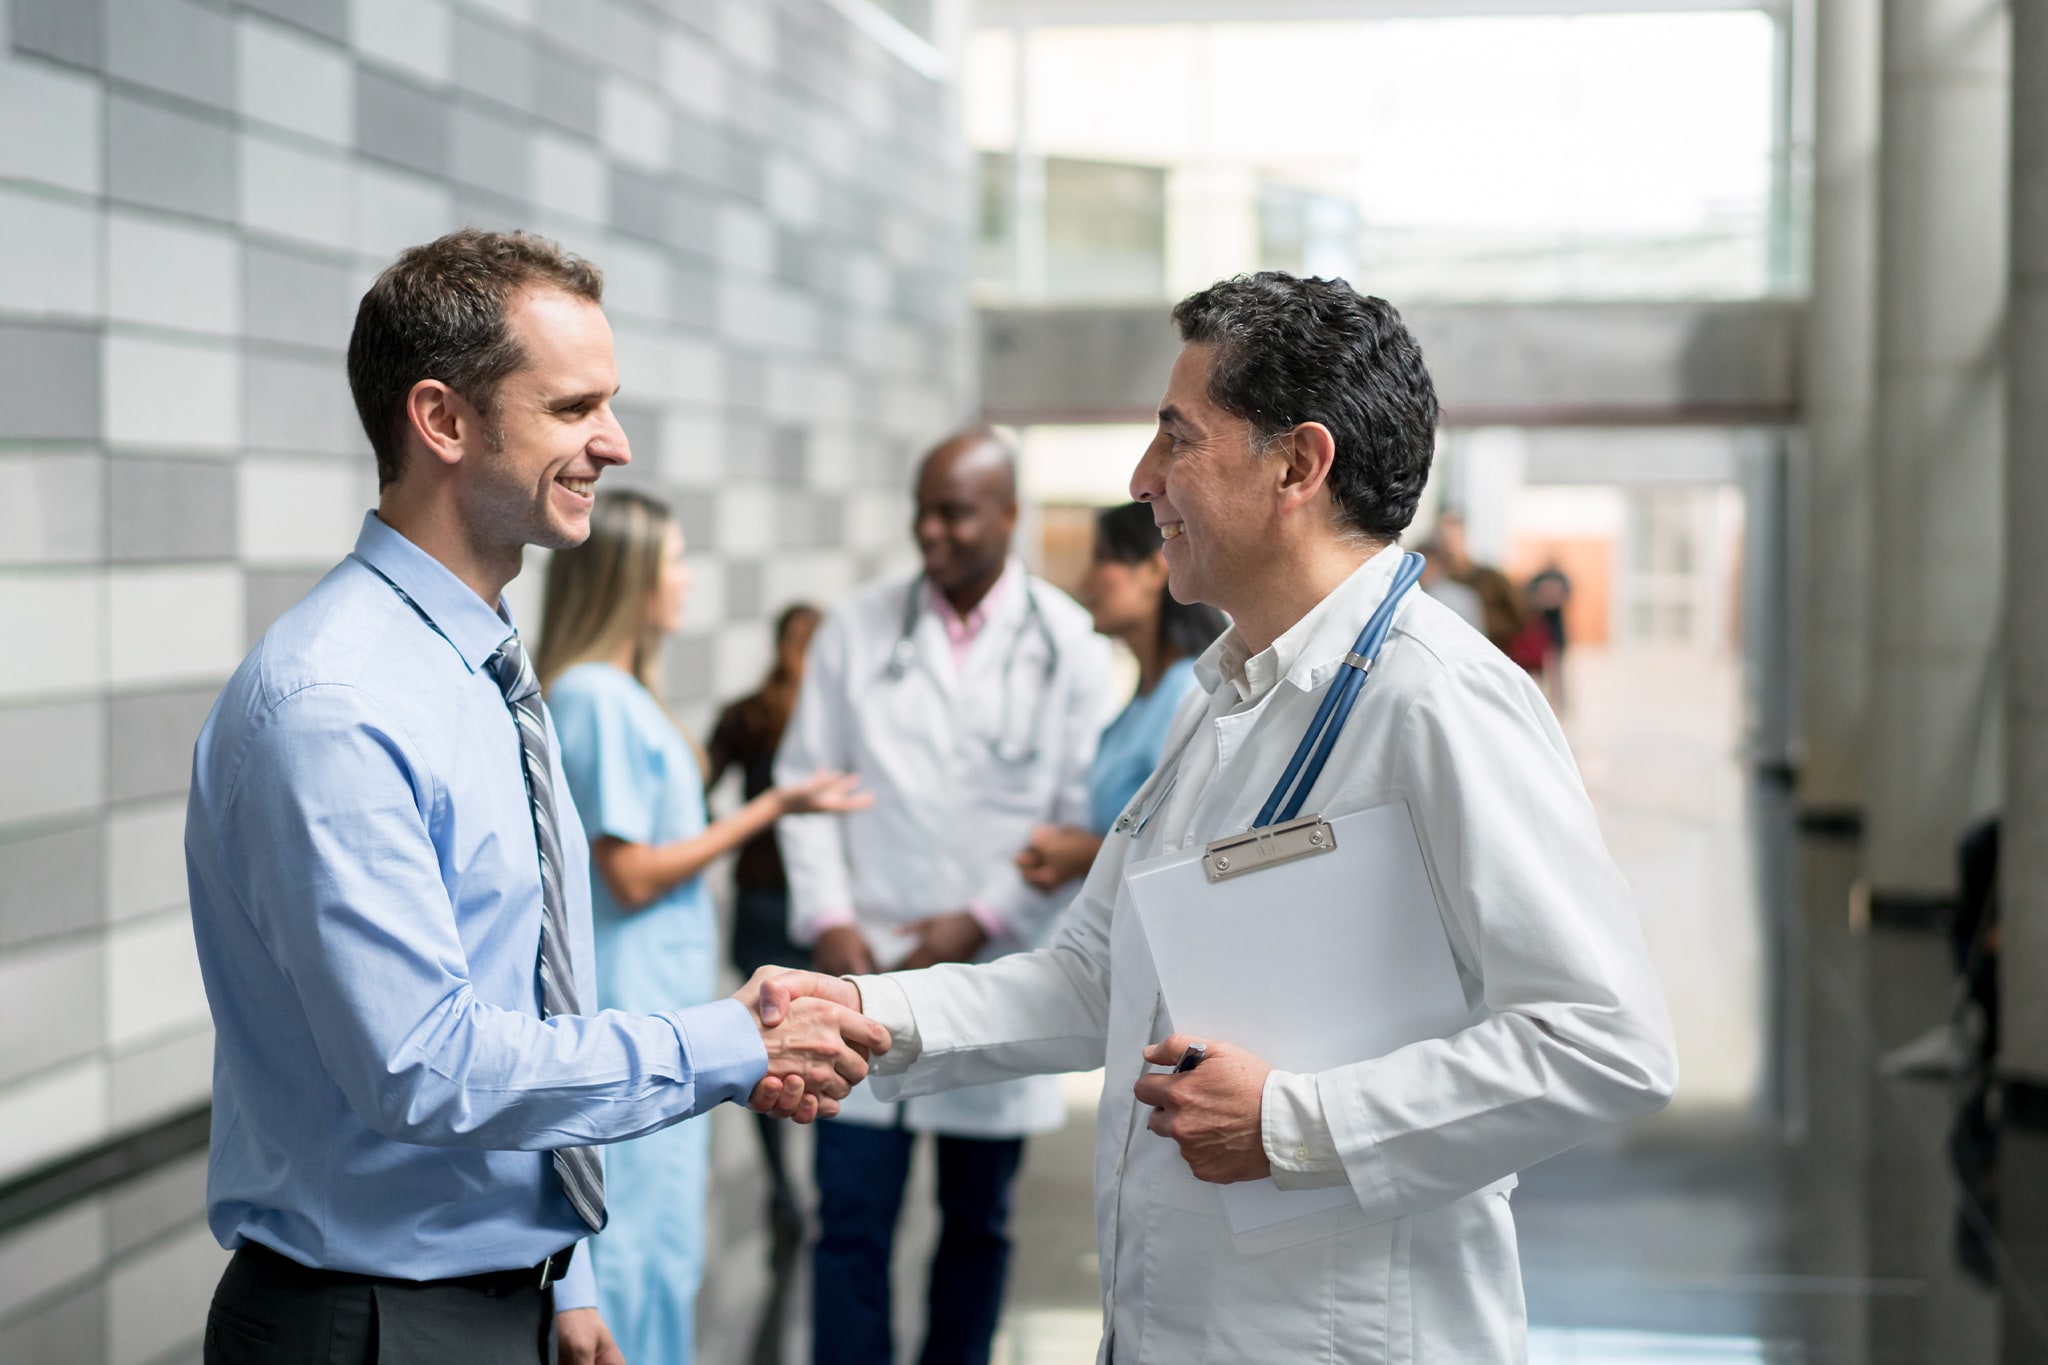 Doctor shaking hands with their colleague